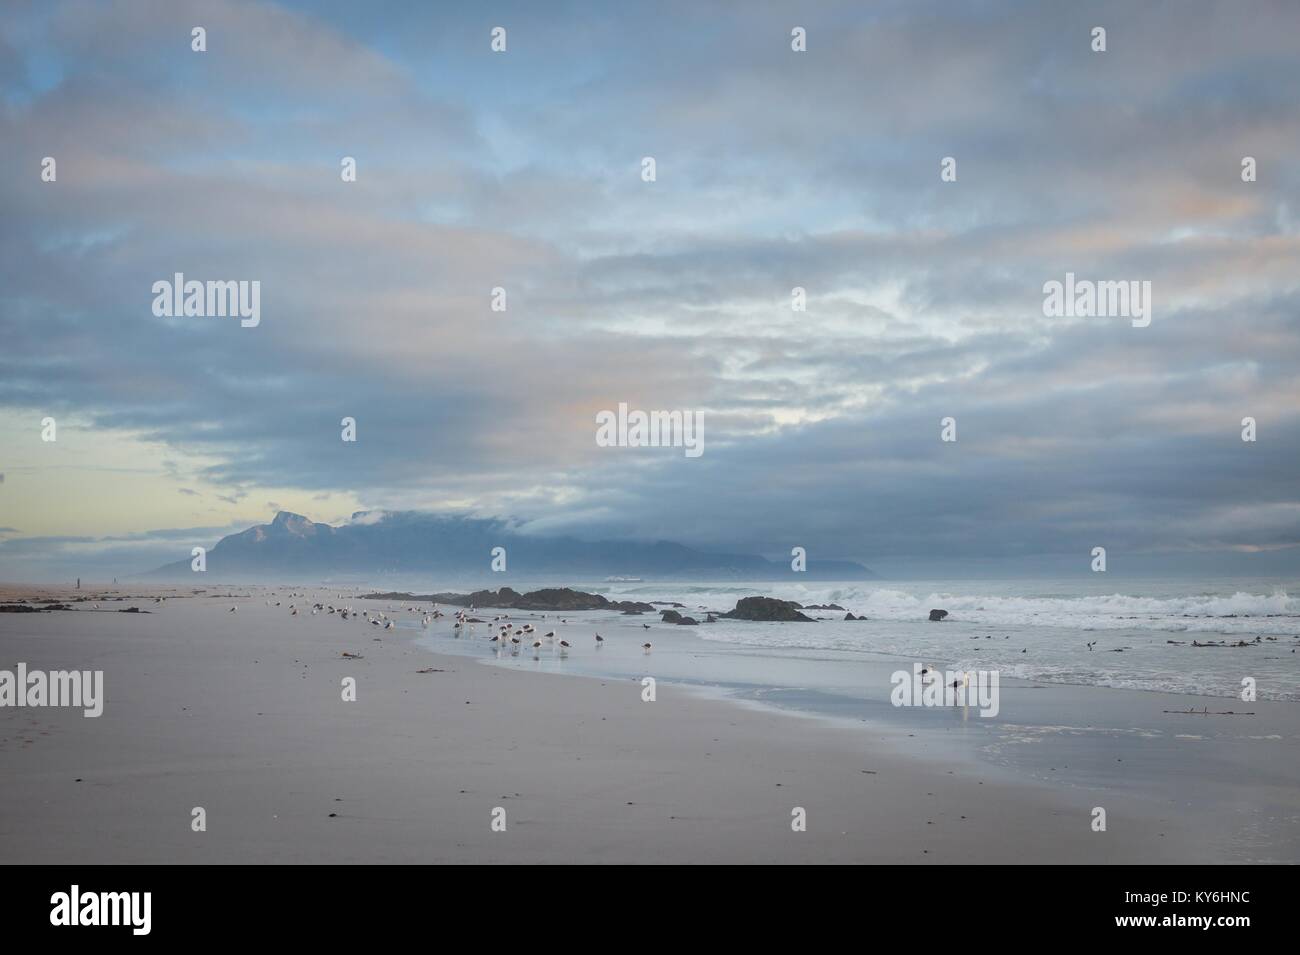 View of Table Mountain National Park in Cape Town from Blouberg Beach at sunset Stock Photo